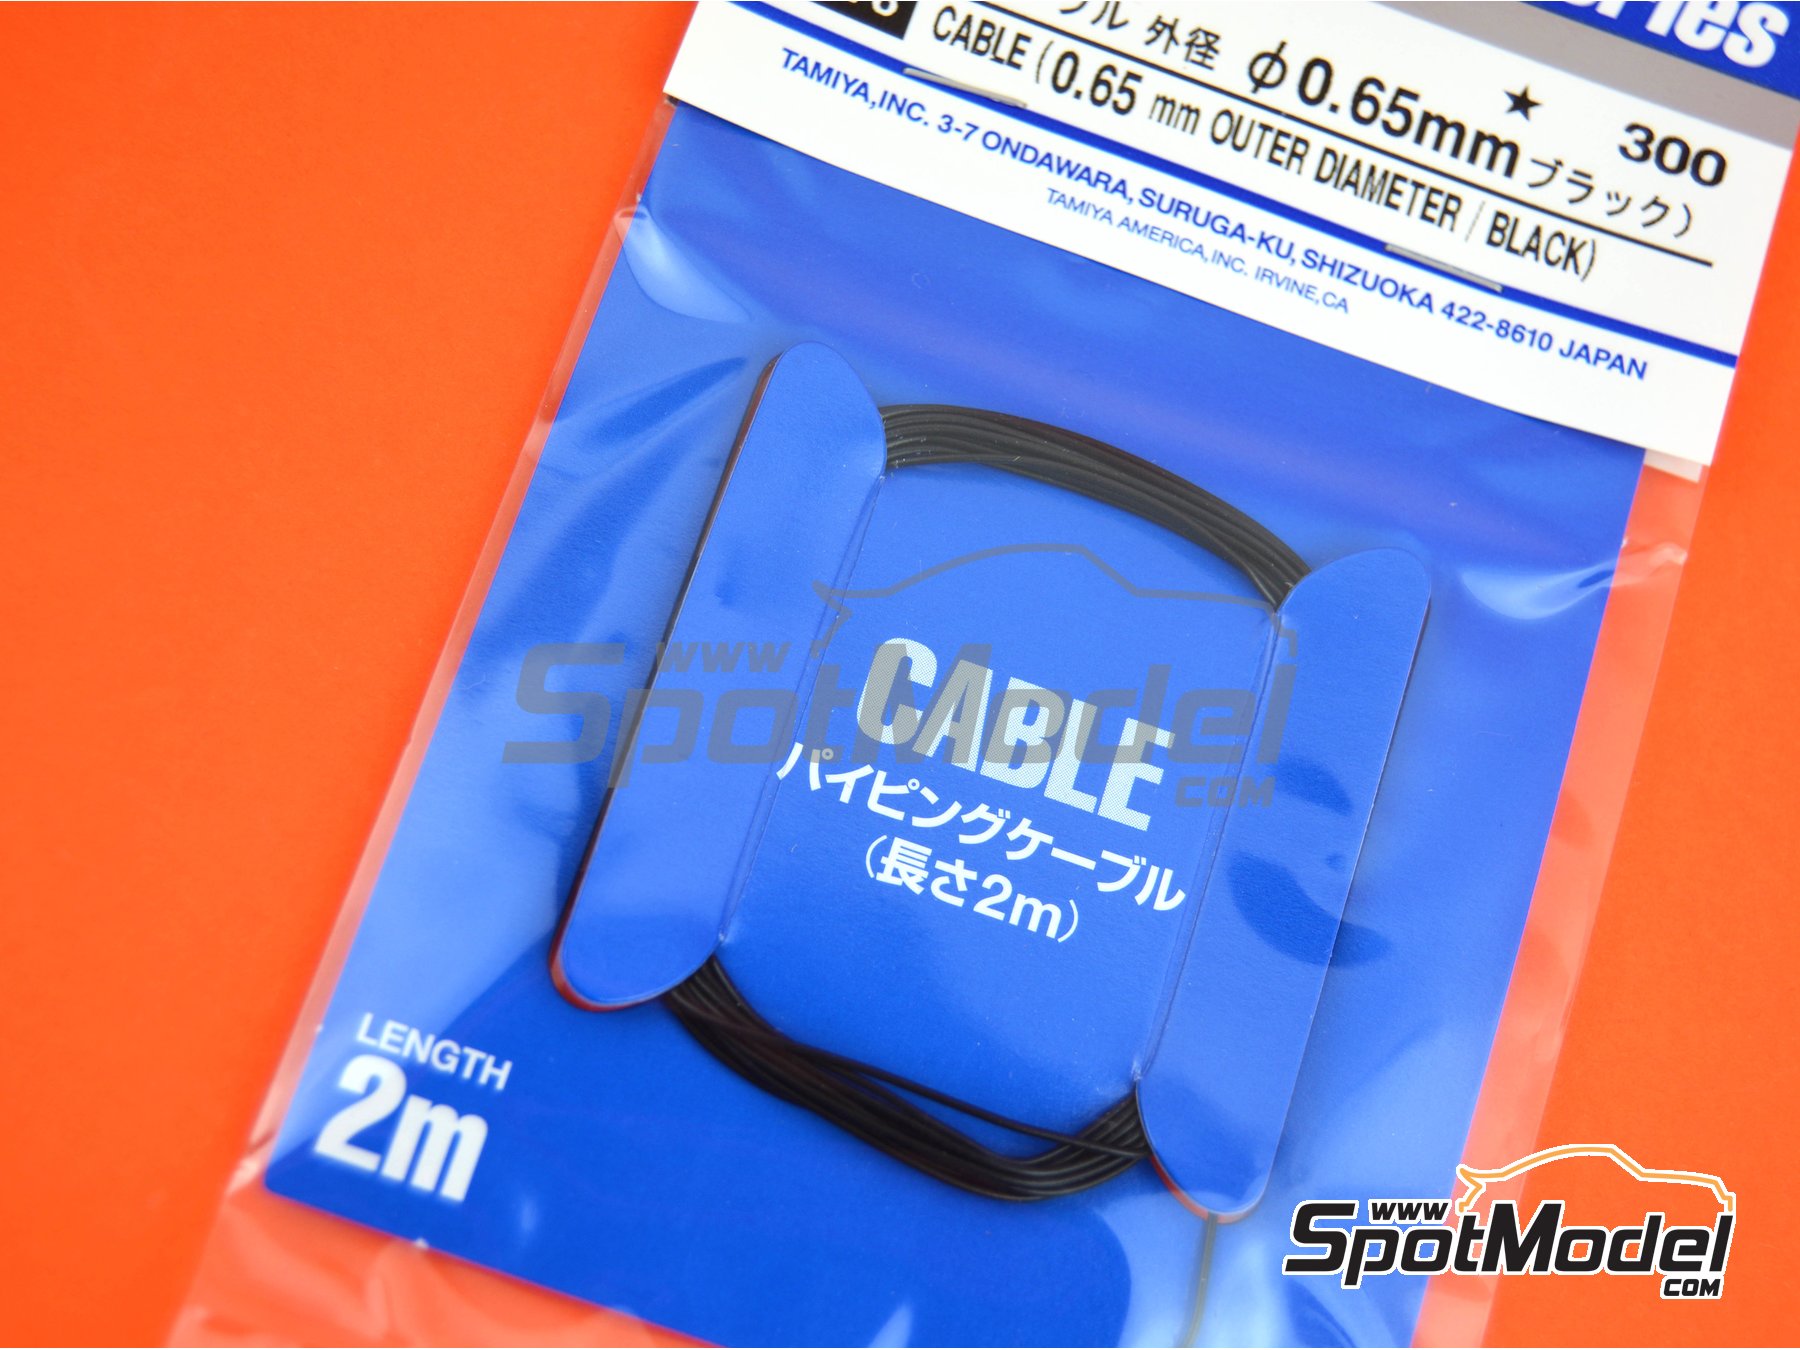 Tamiya Cable Outer Dia 0.8mm Black Tam12677 for sale online 